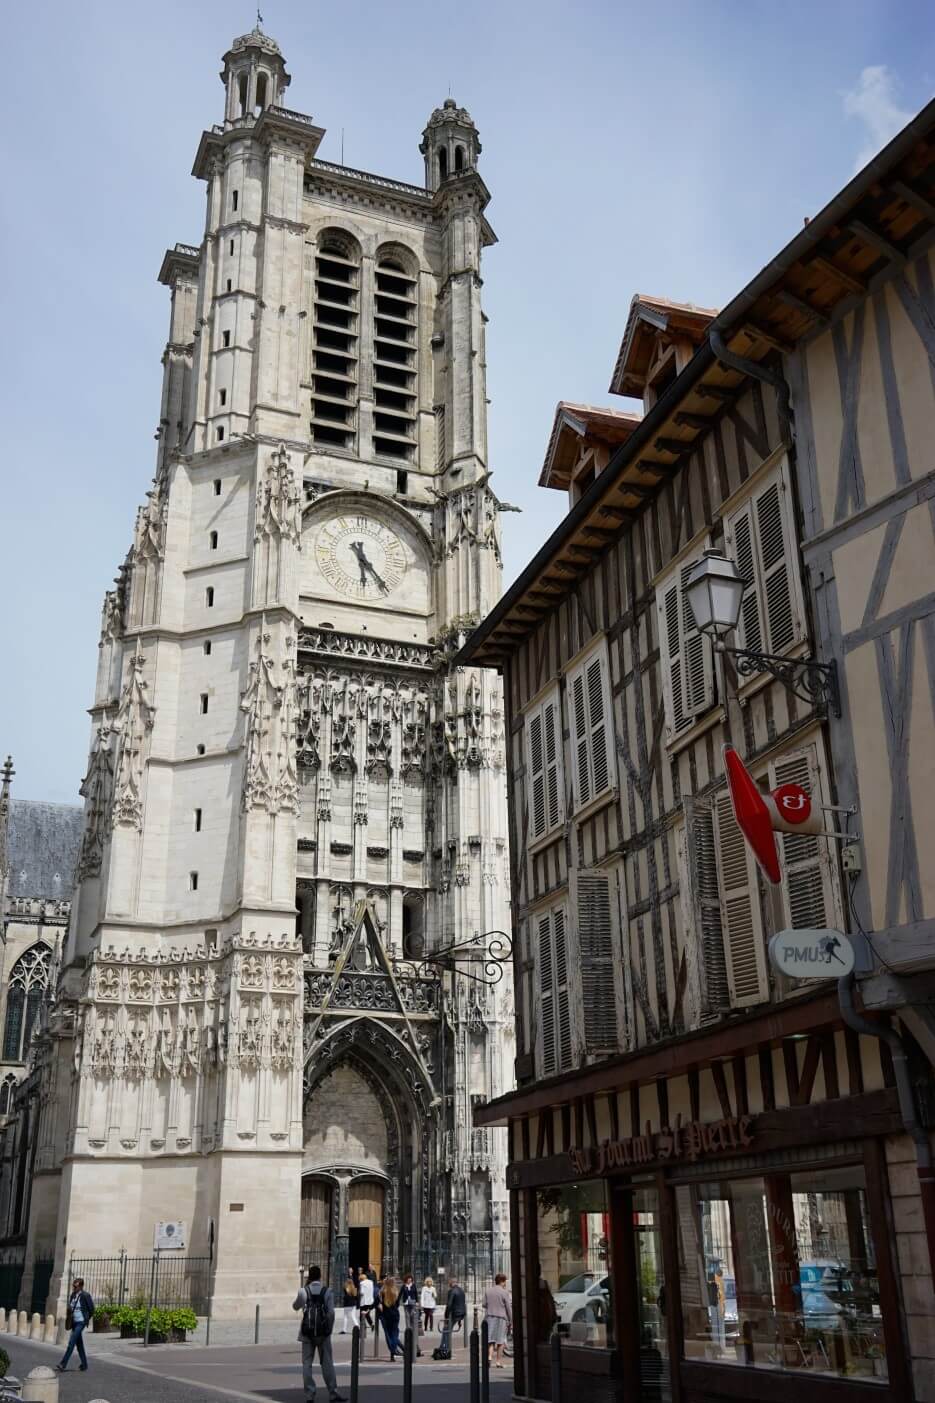 A cathedral bell tower in Troyes France